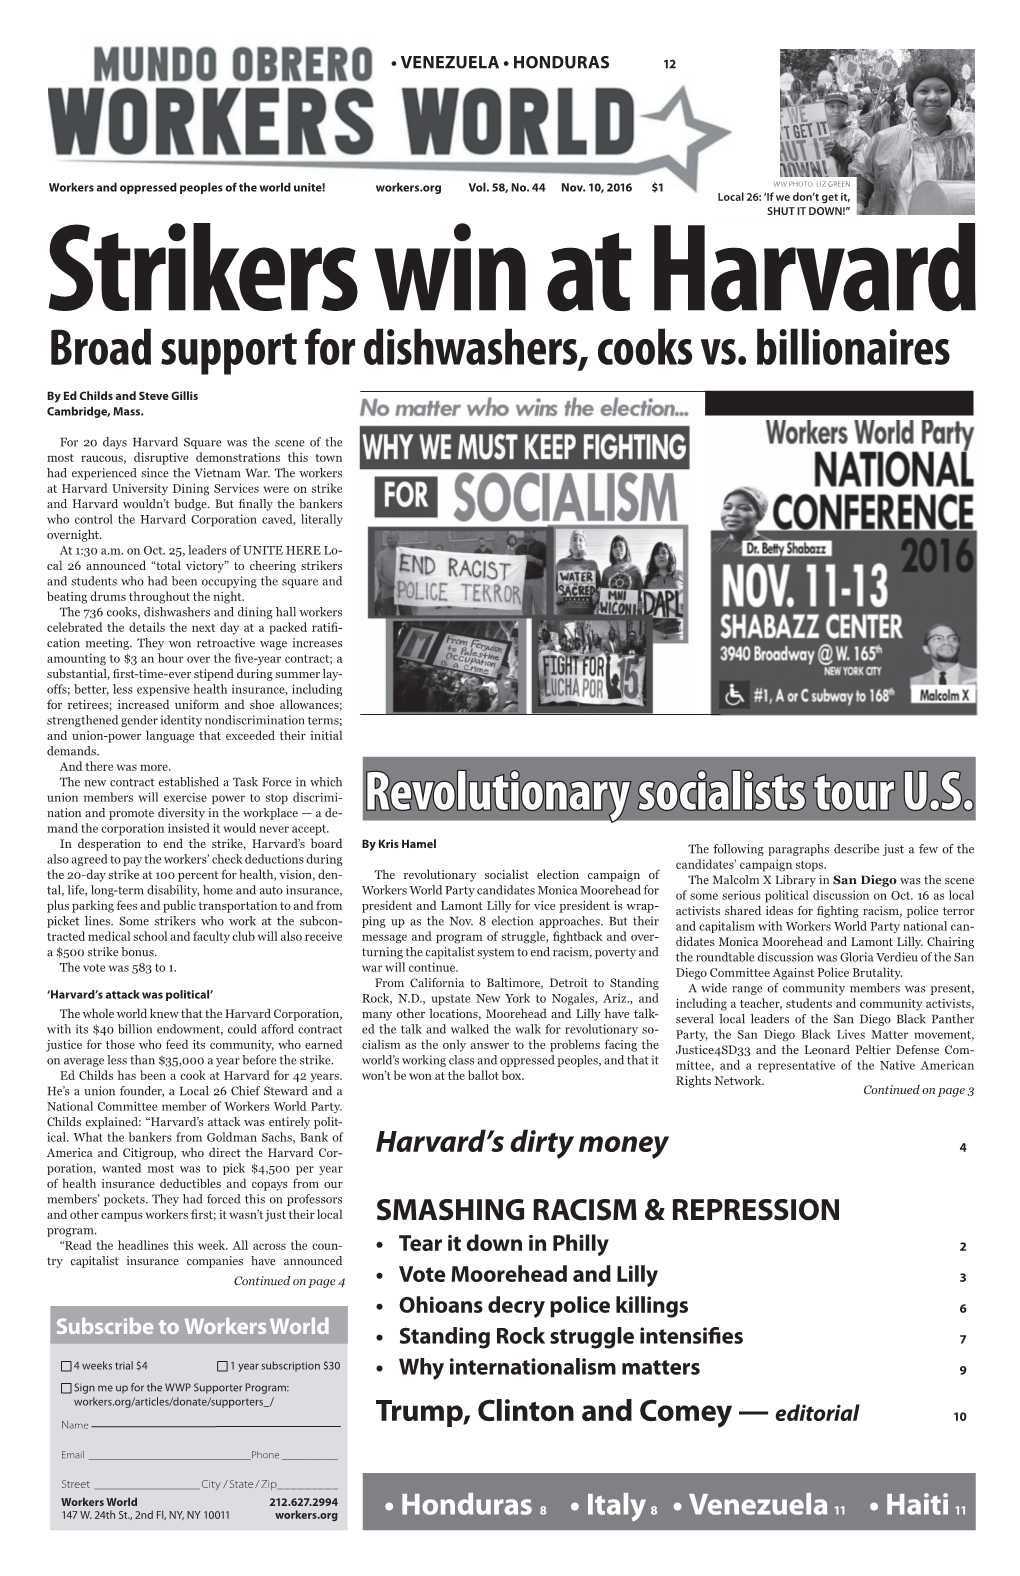 Revolutionary Socialists Tour U.S. Mand the Corporation Insisted It Would Never Accept